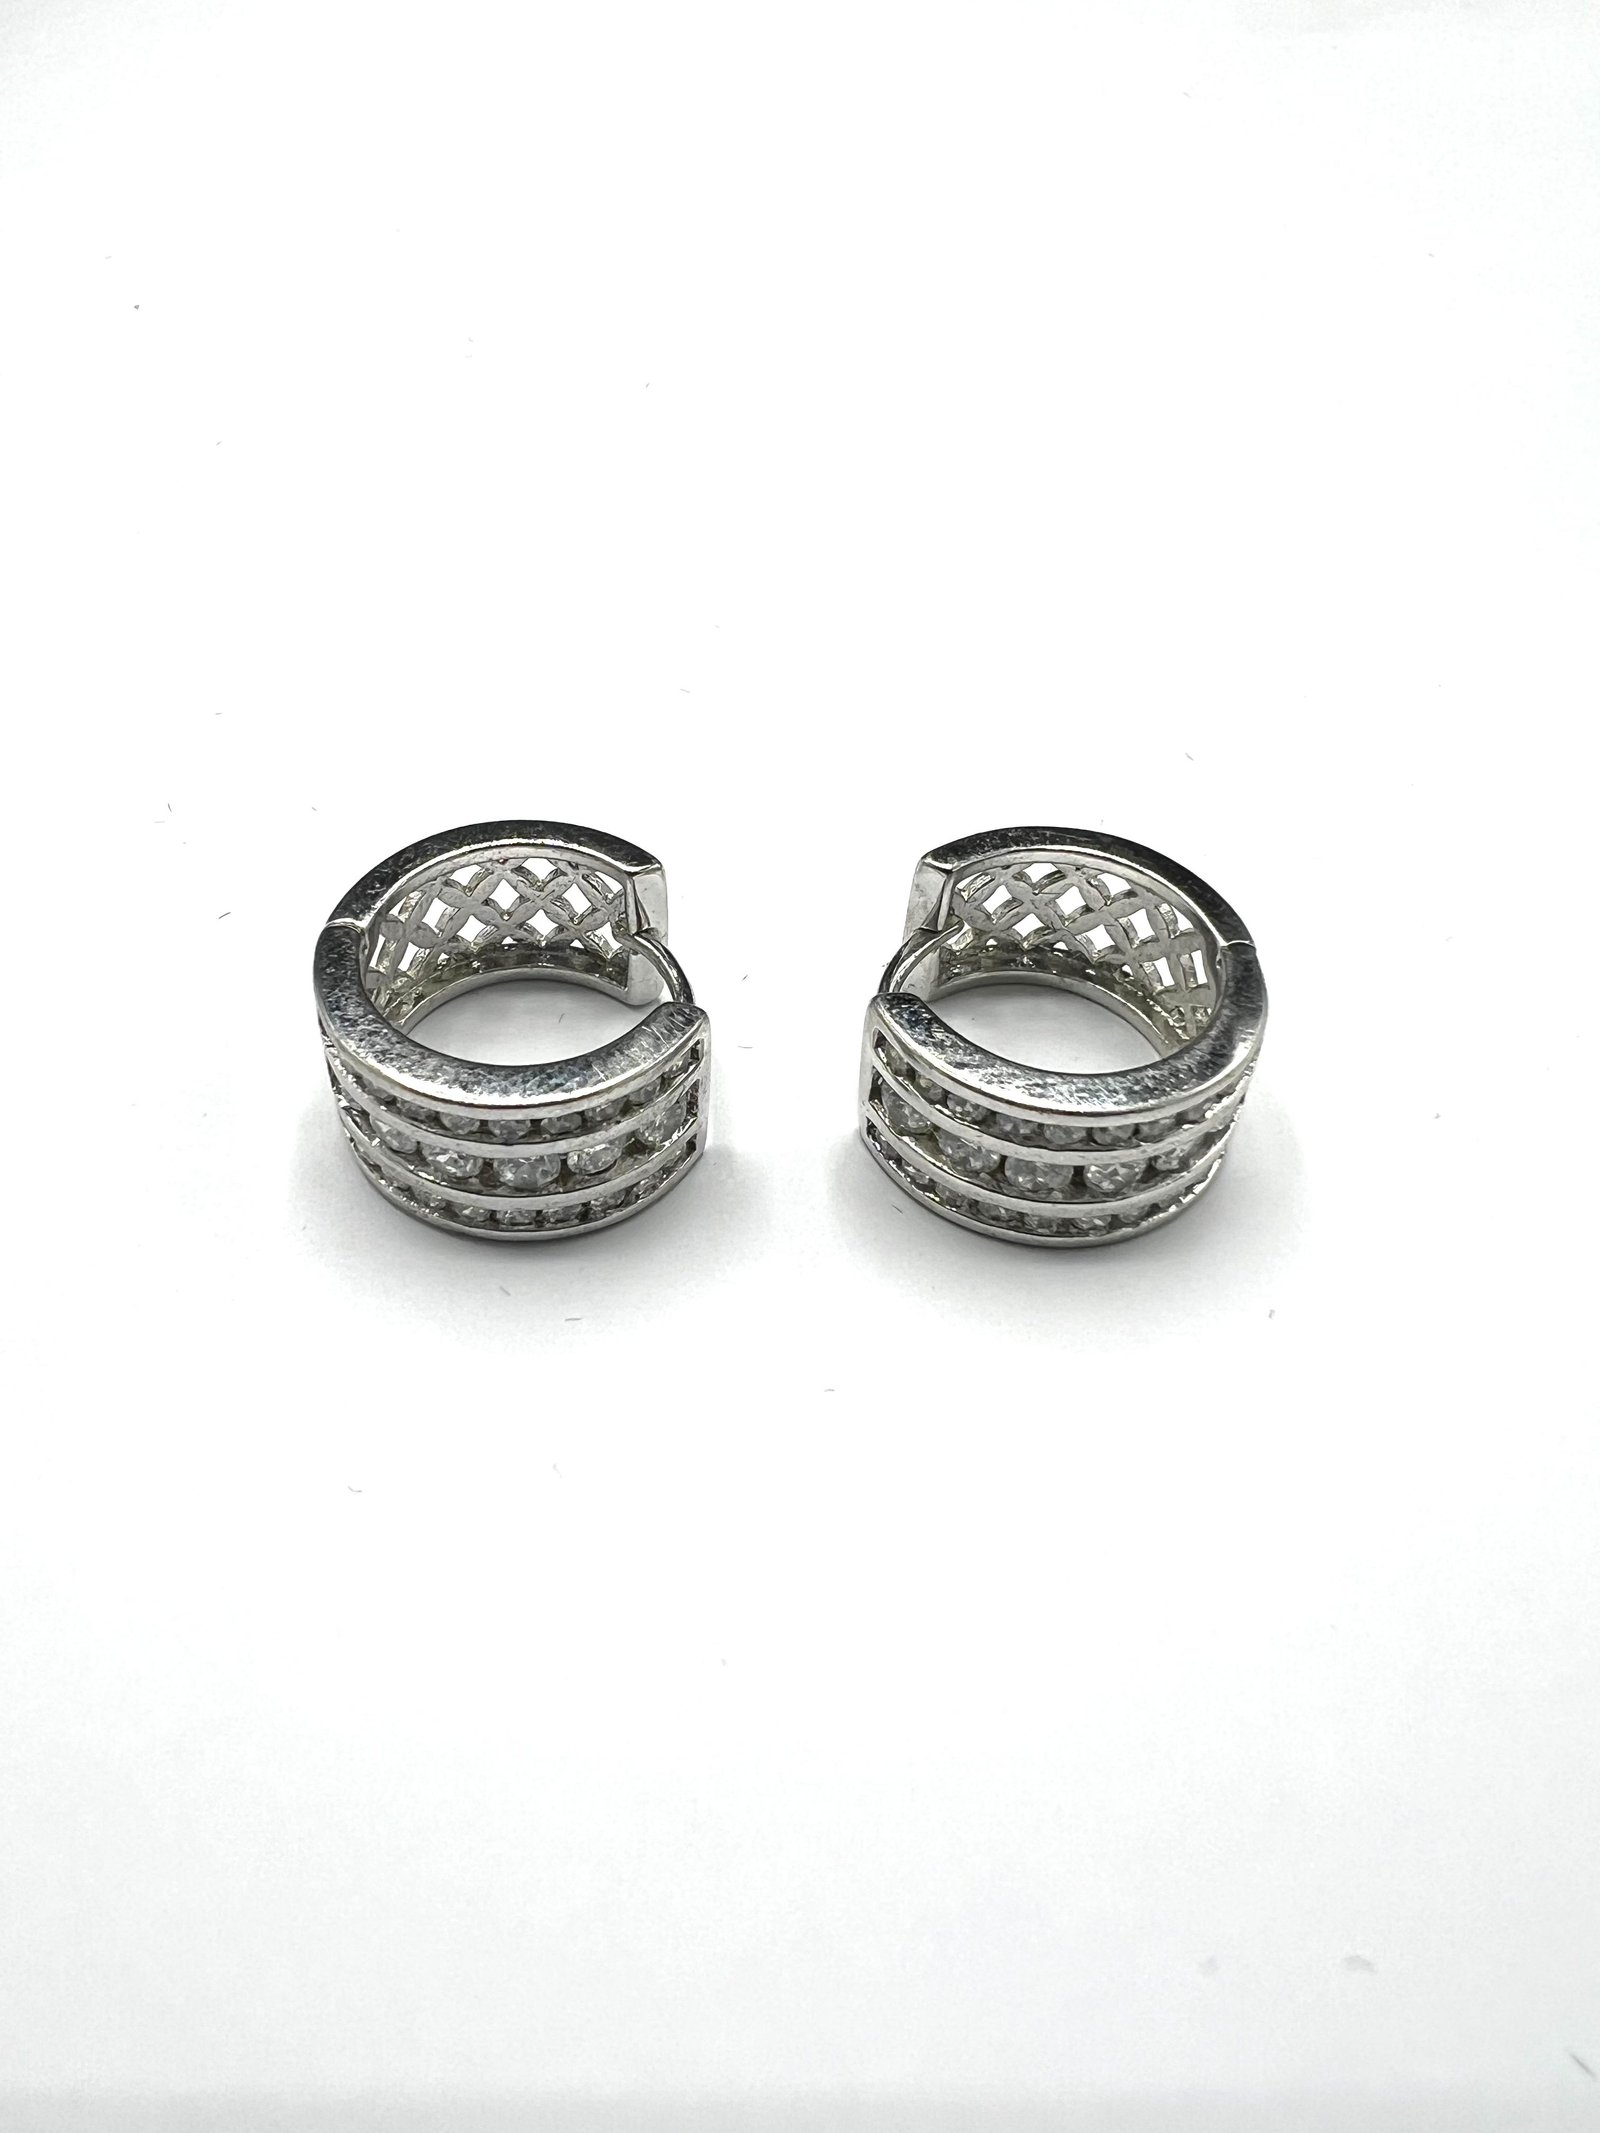 Best Quality Silver Plated Earrings